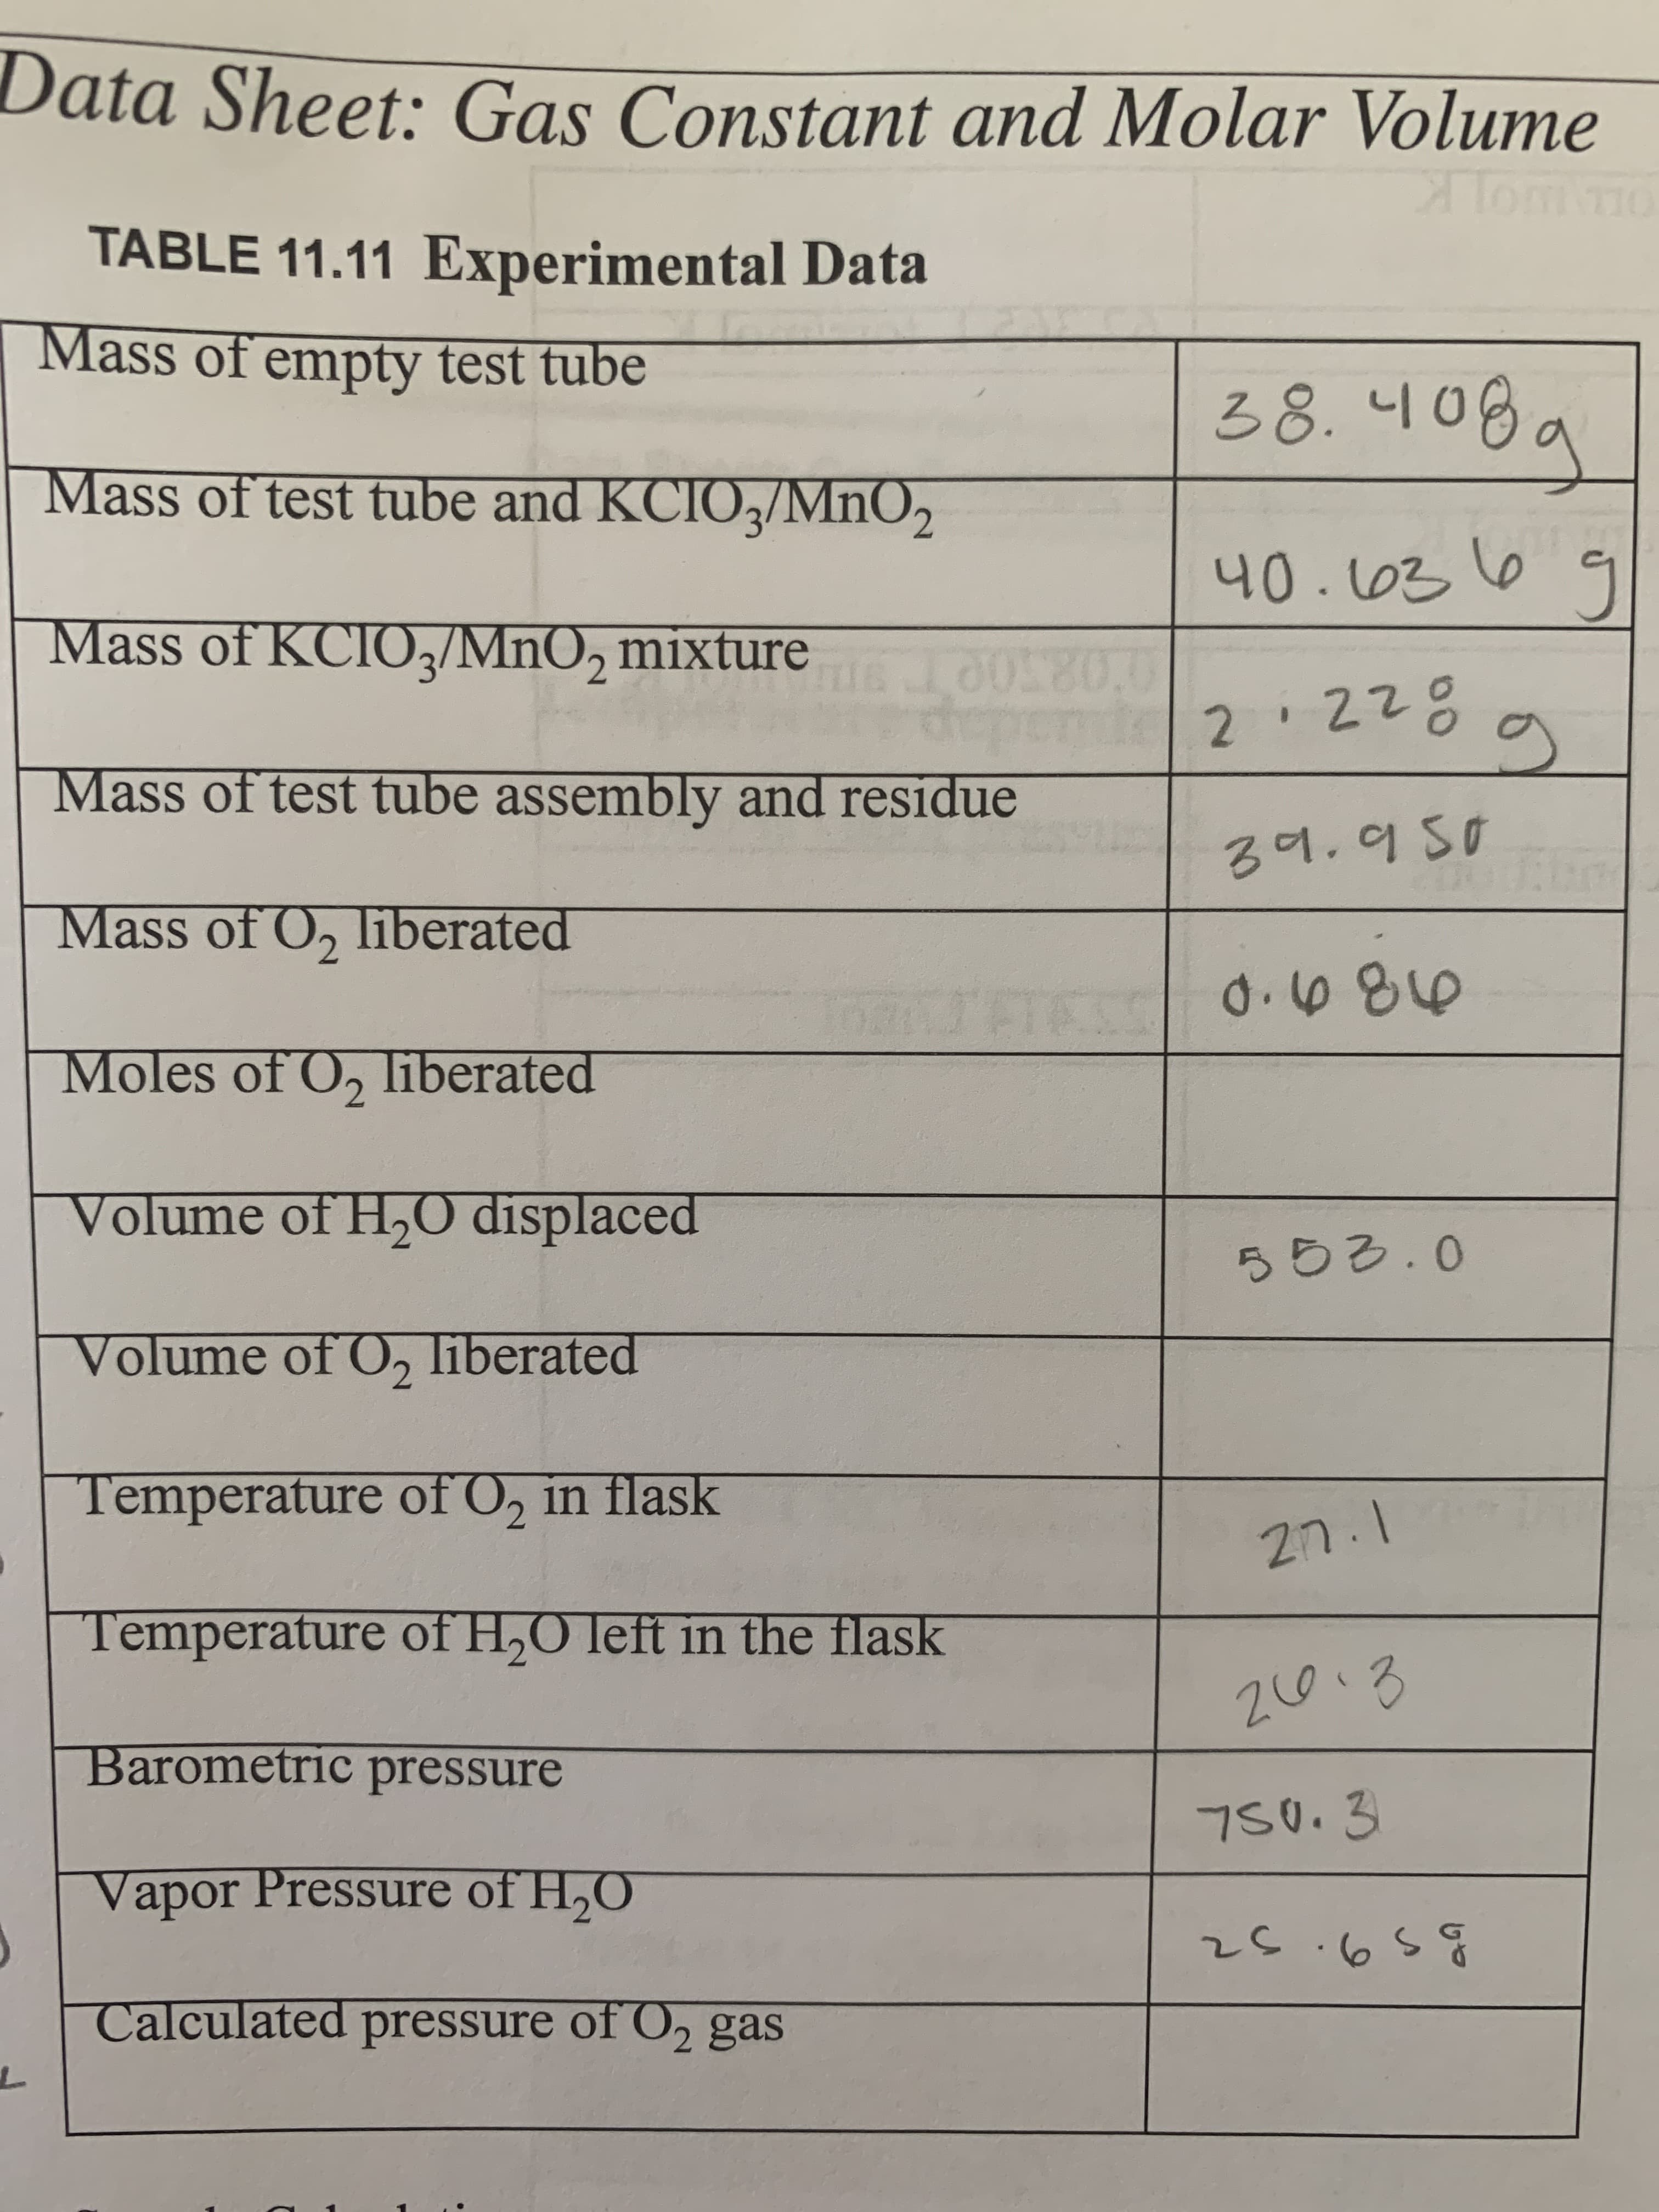 Data Sheet: Gas Constant and Molar Volume
TABLE 11.11 Experimental Data
OLL O K
Mass of empty test tube
Mass of test tube and KCIO3/MnO2
の
2の0h
Mass of KCIO3/MnO, mixture 0080.0
19
39.950
2.
Mass of test tube assembly and residue
Mass of O, liberated
のるのD
Moles of O, liberated
Volume of H,O displaced
Volume of O, liberated
Temperature of O, in flask
Temperature of H,O left in the flask
2,の2
Barometric pressure
750.3
Vapor Pressure of H,O
Calculated pressure of O2 gas
